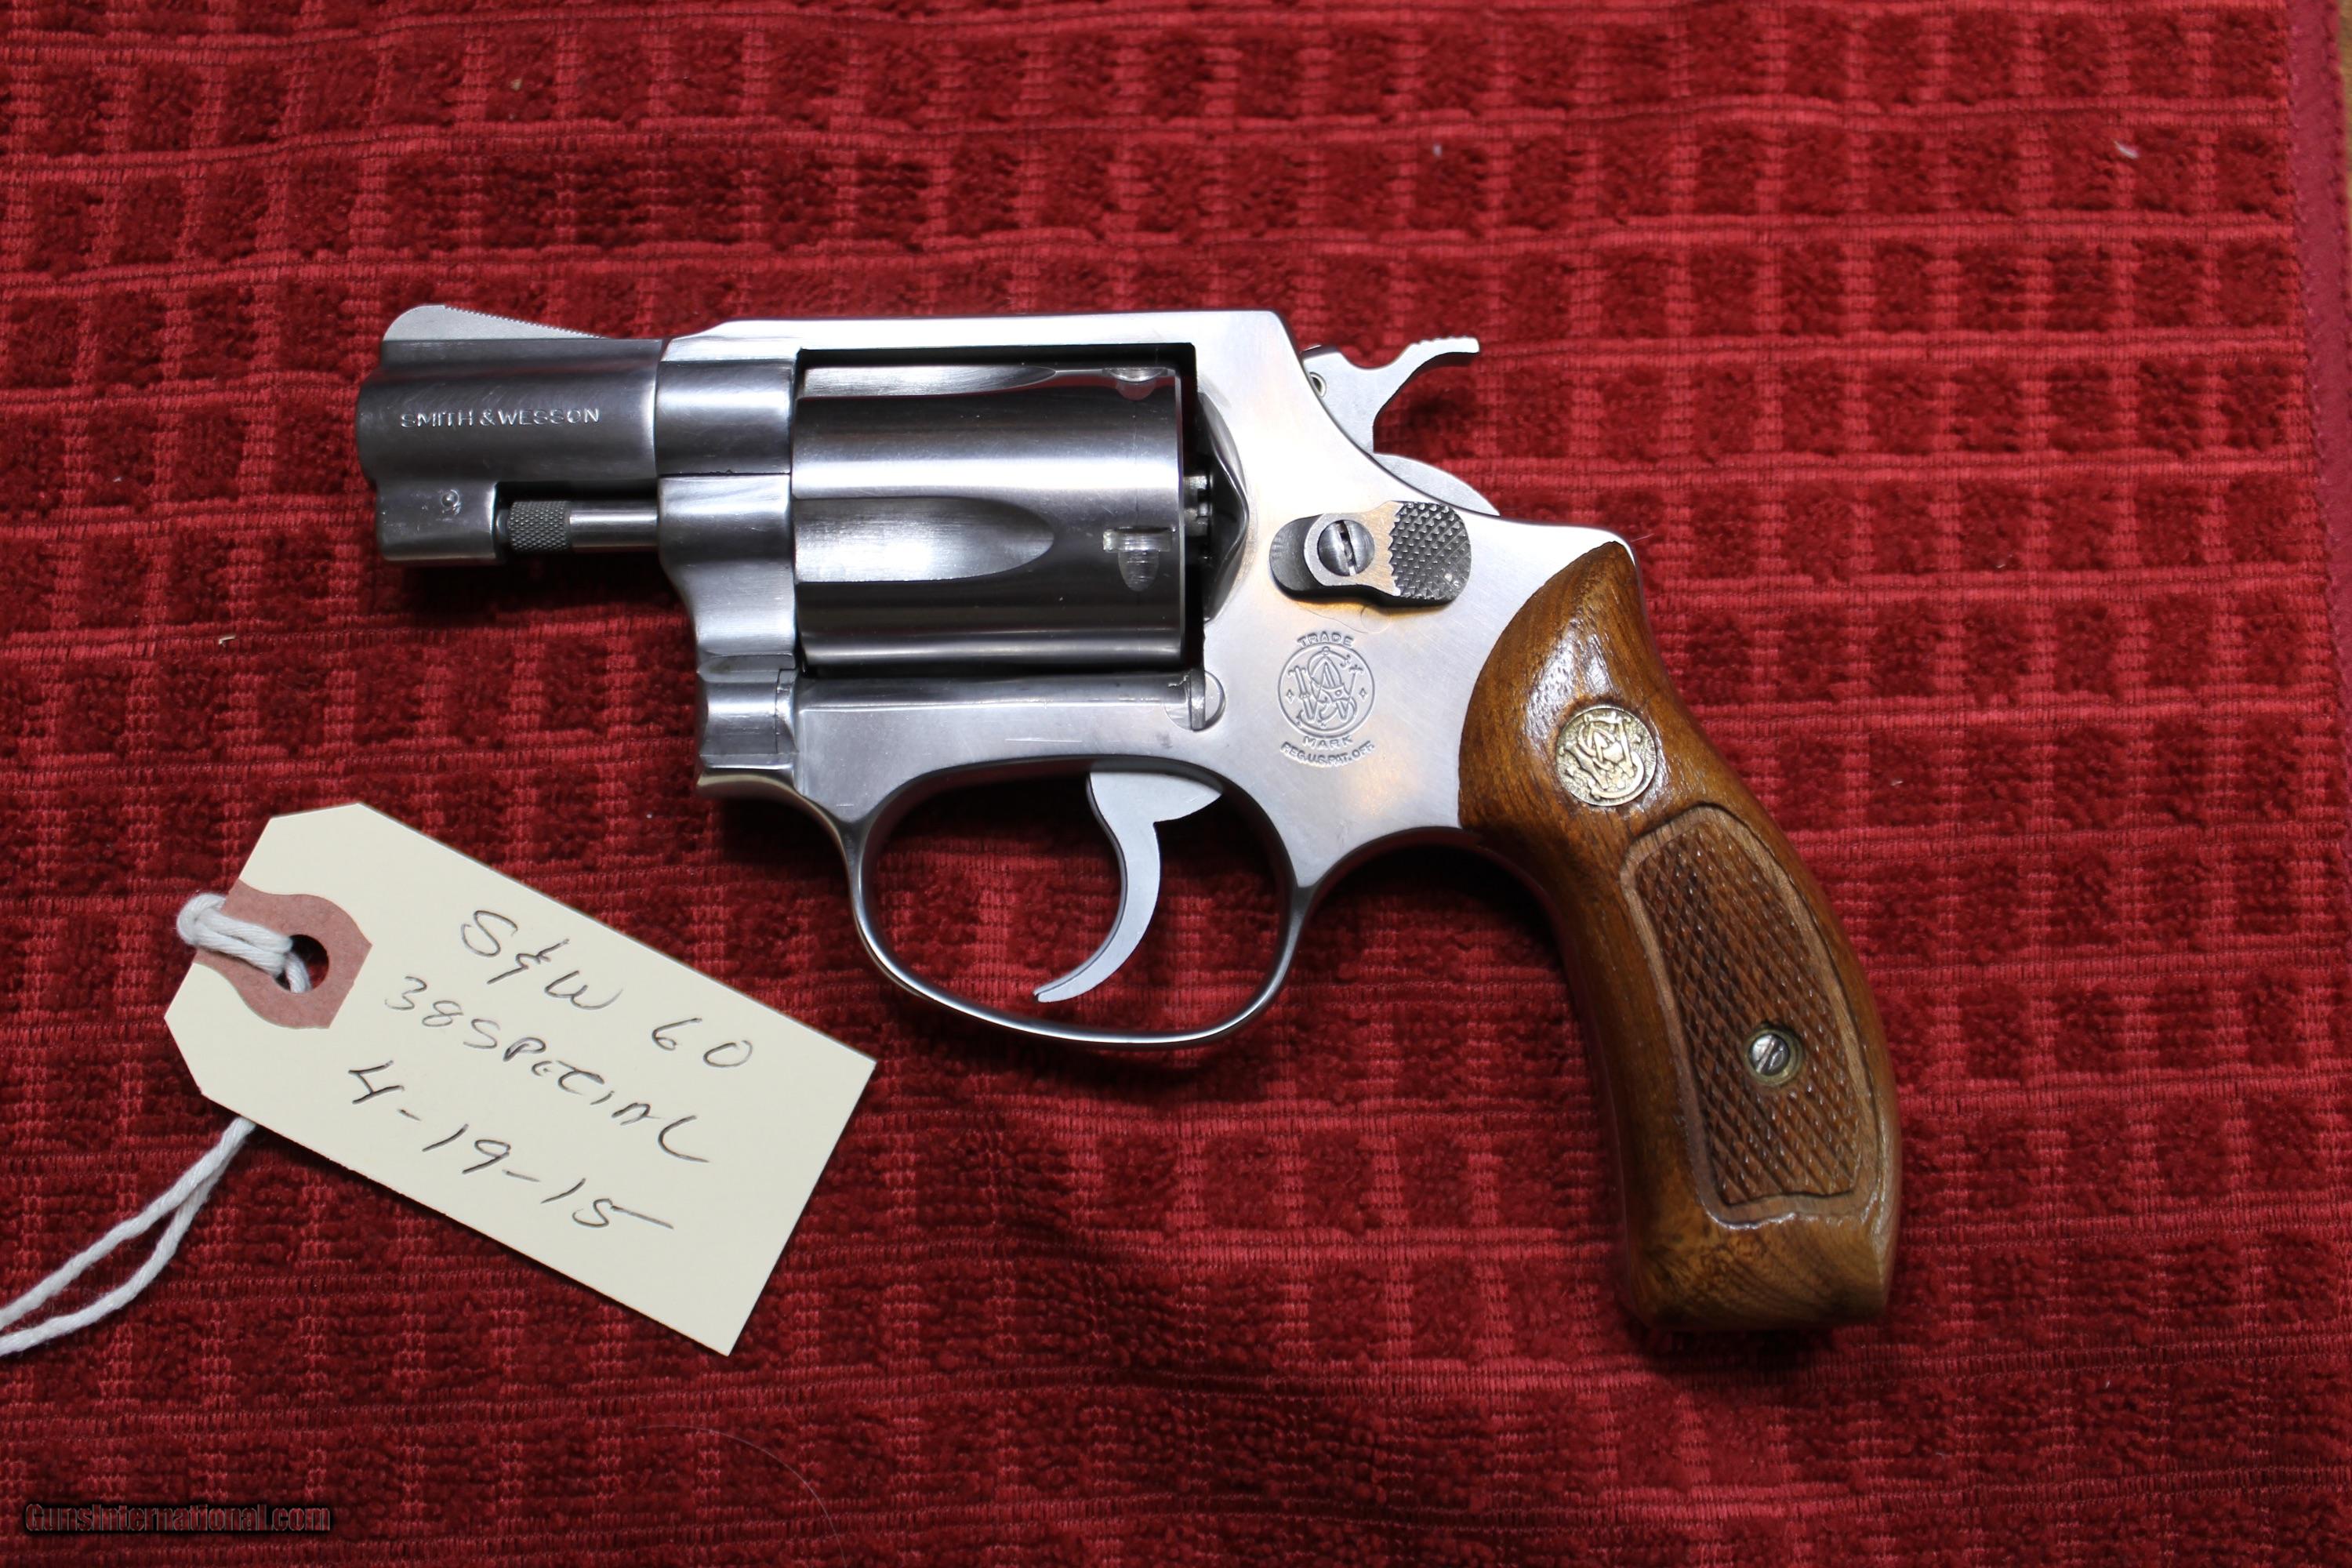 Smith And Wesson Sandw Stainless Steel 5 Shot Model 60 38 Special Revolver Images And Photos 9929